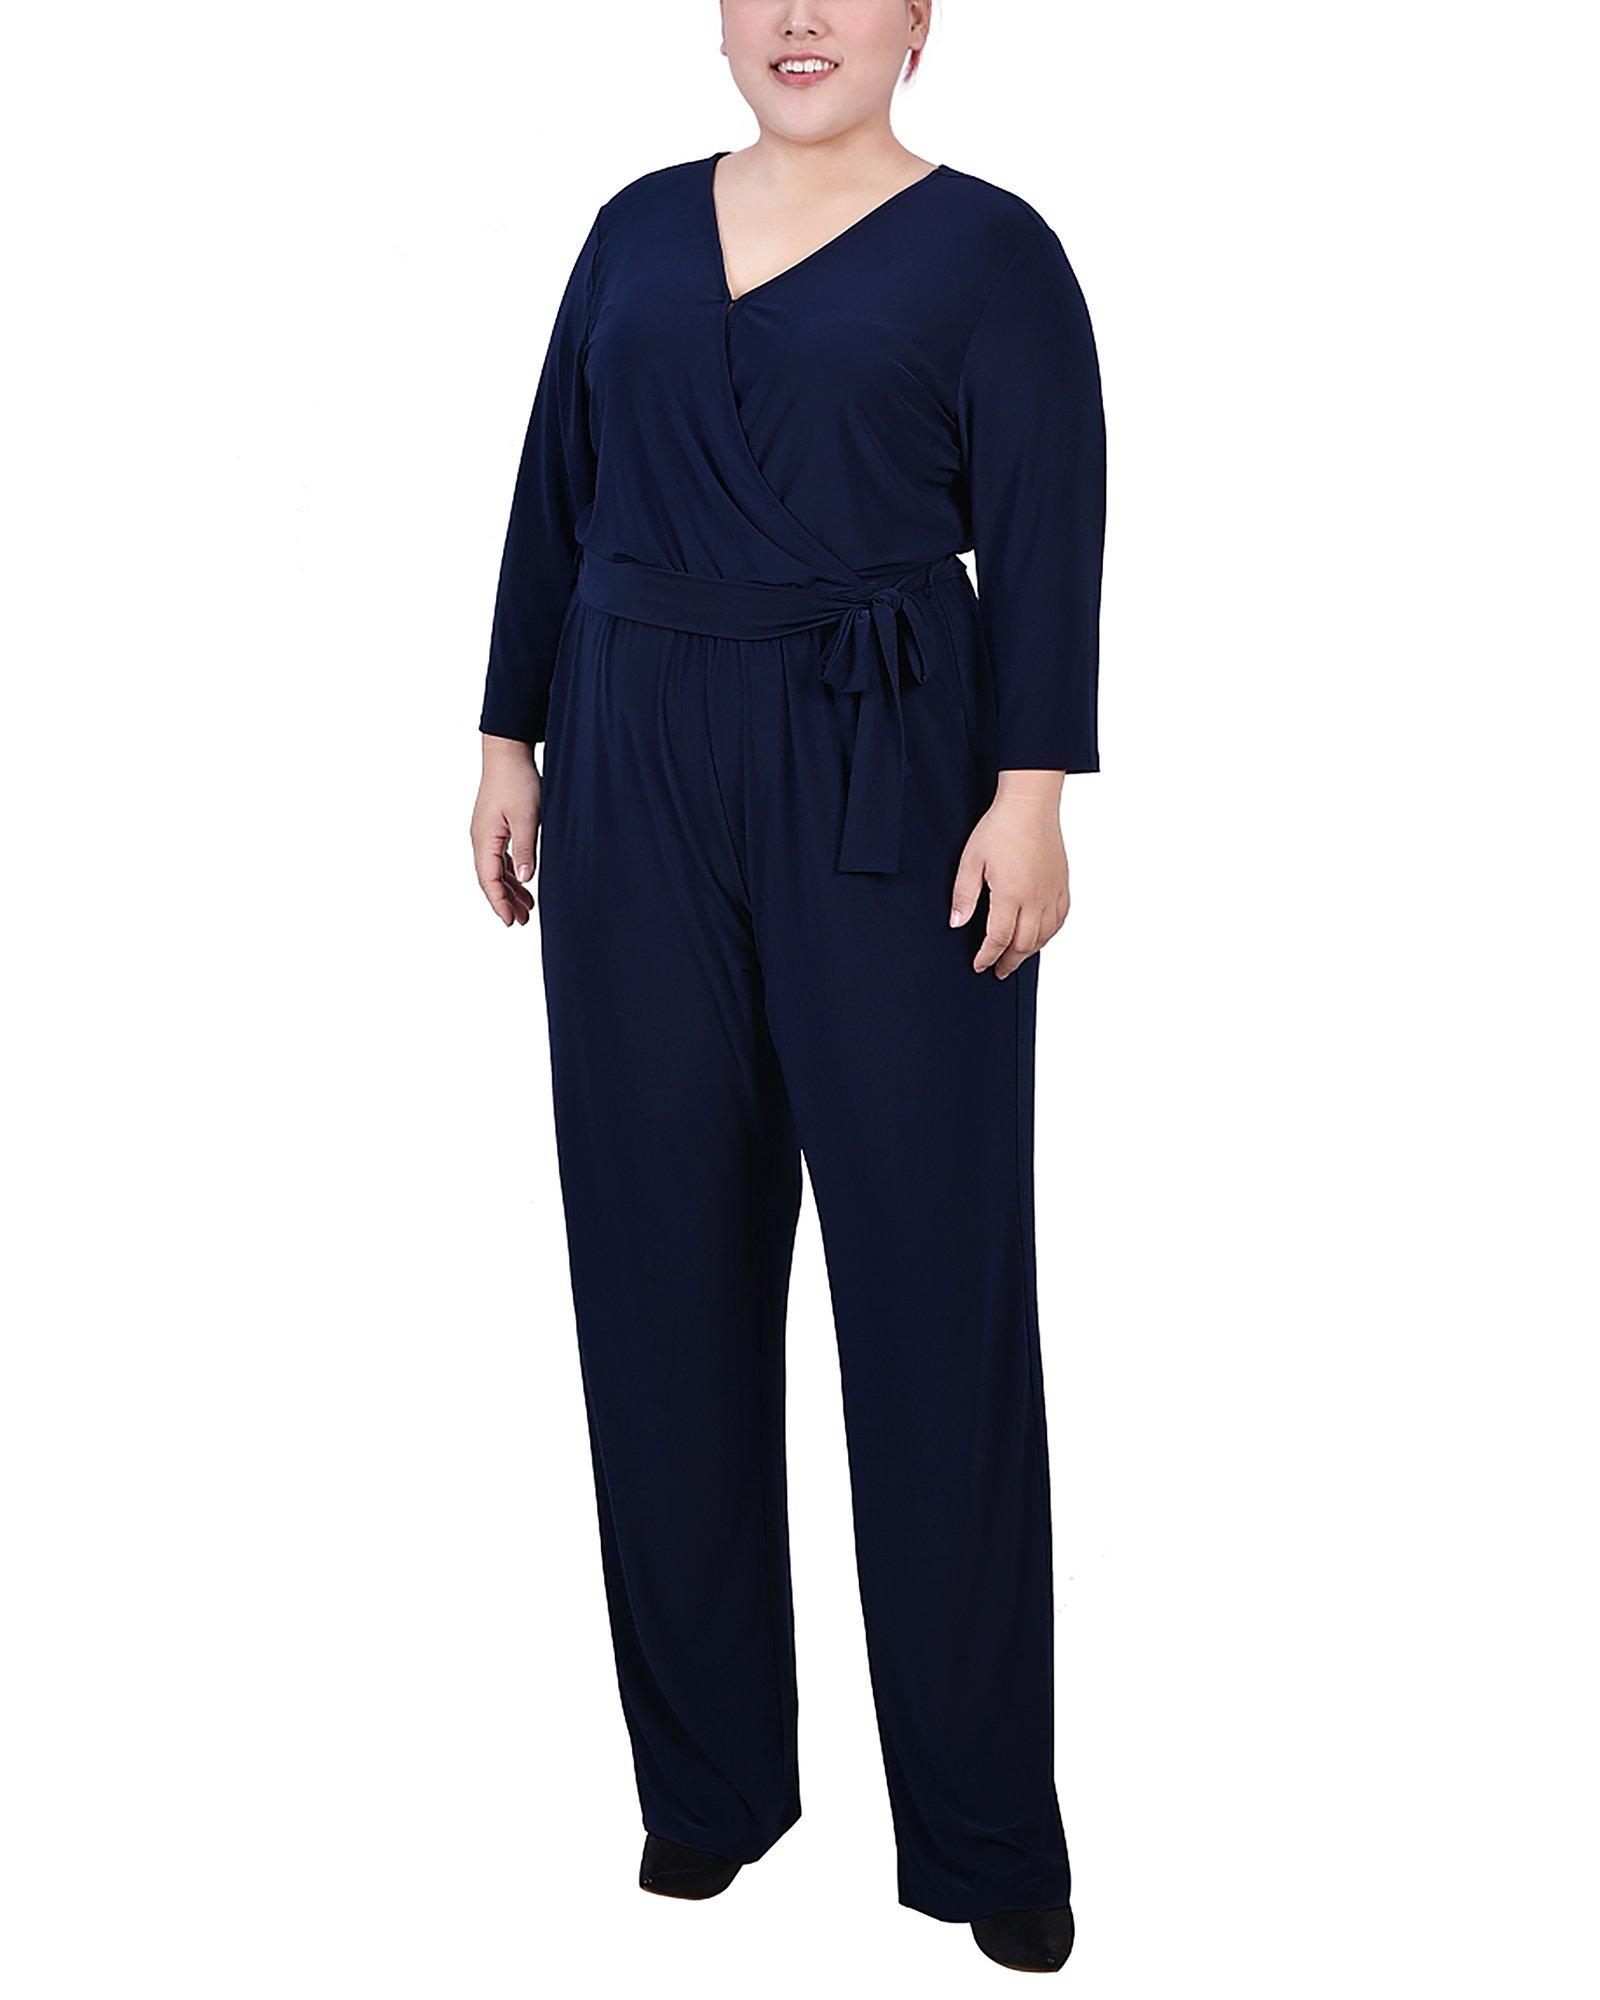 Womens Plus Size 3/4 Sleeve Belted Jumpsuit